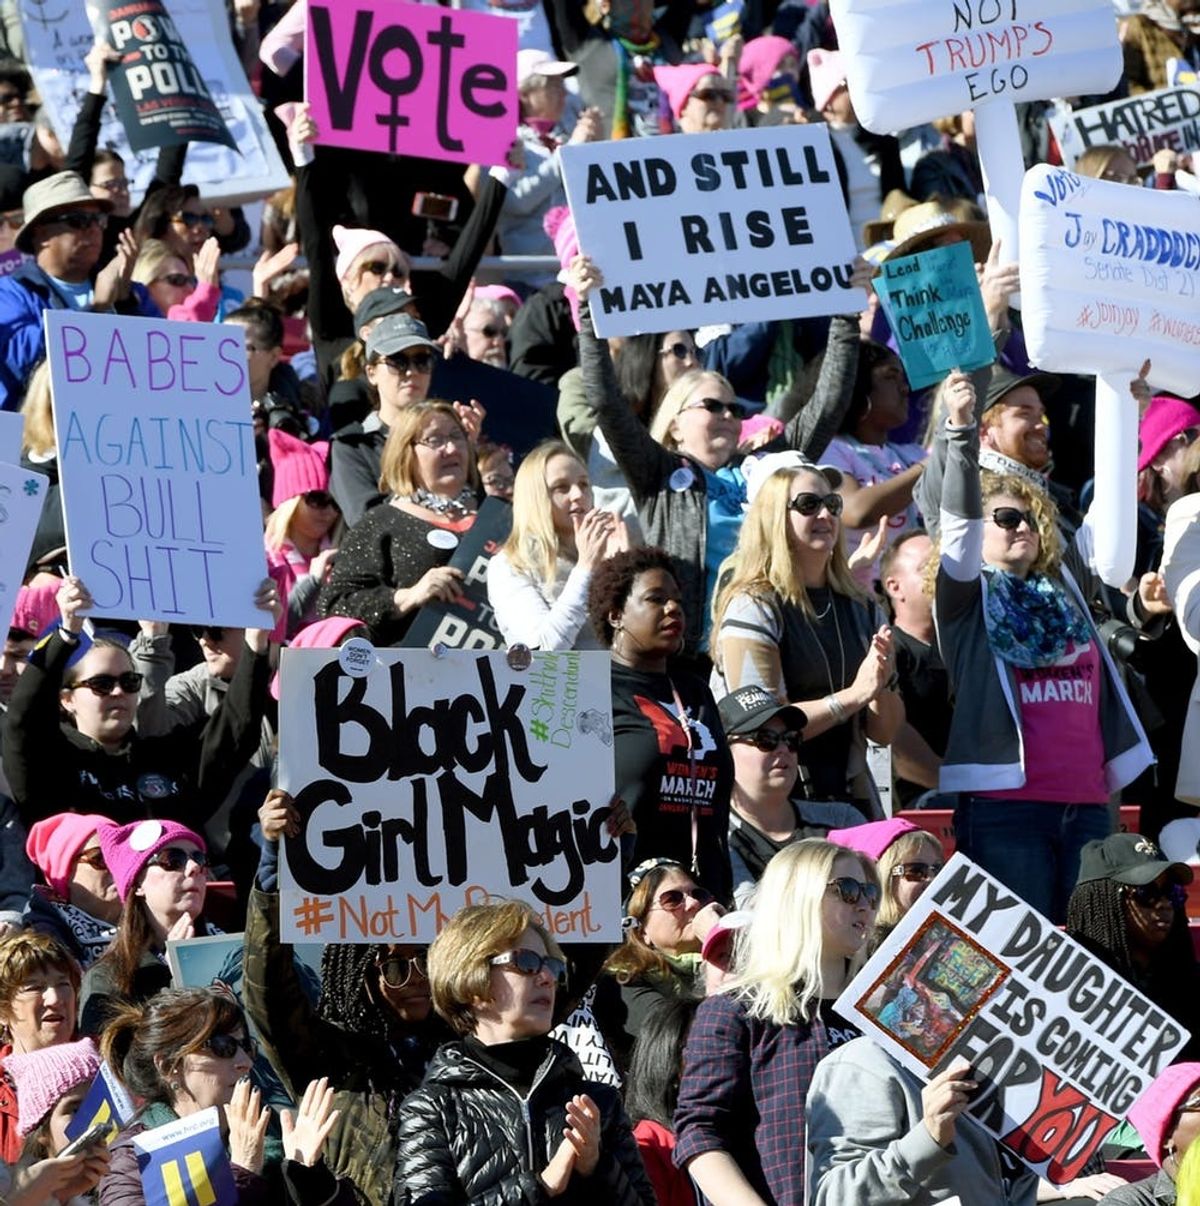 Here’s What We Know So Far About the 2019 Women’s March